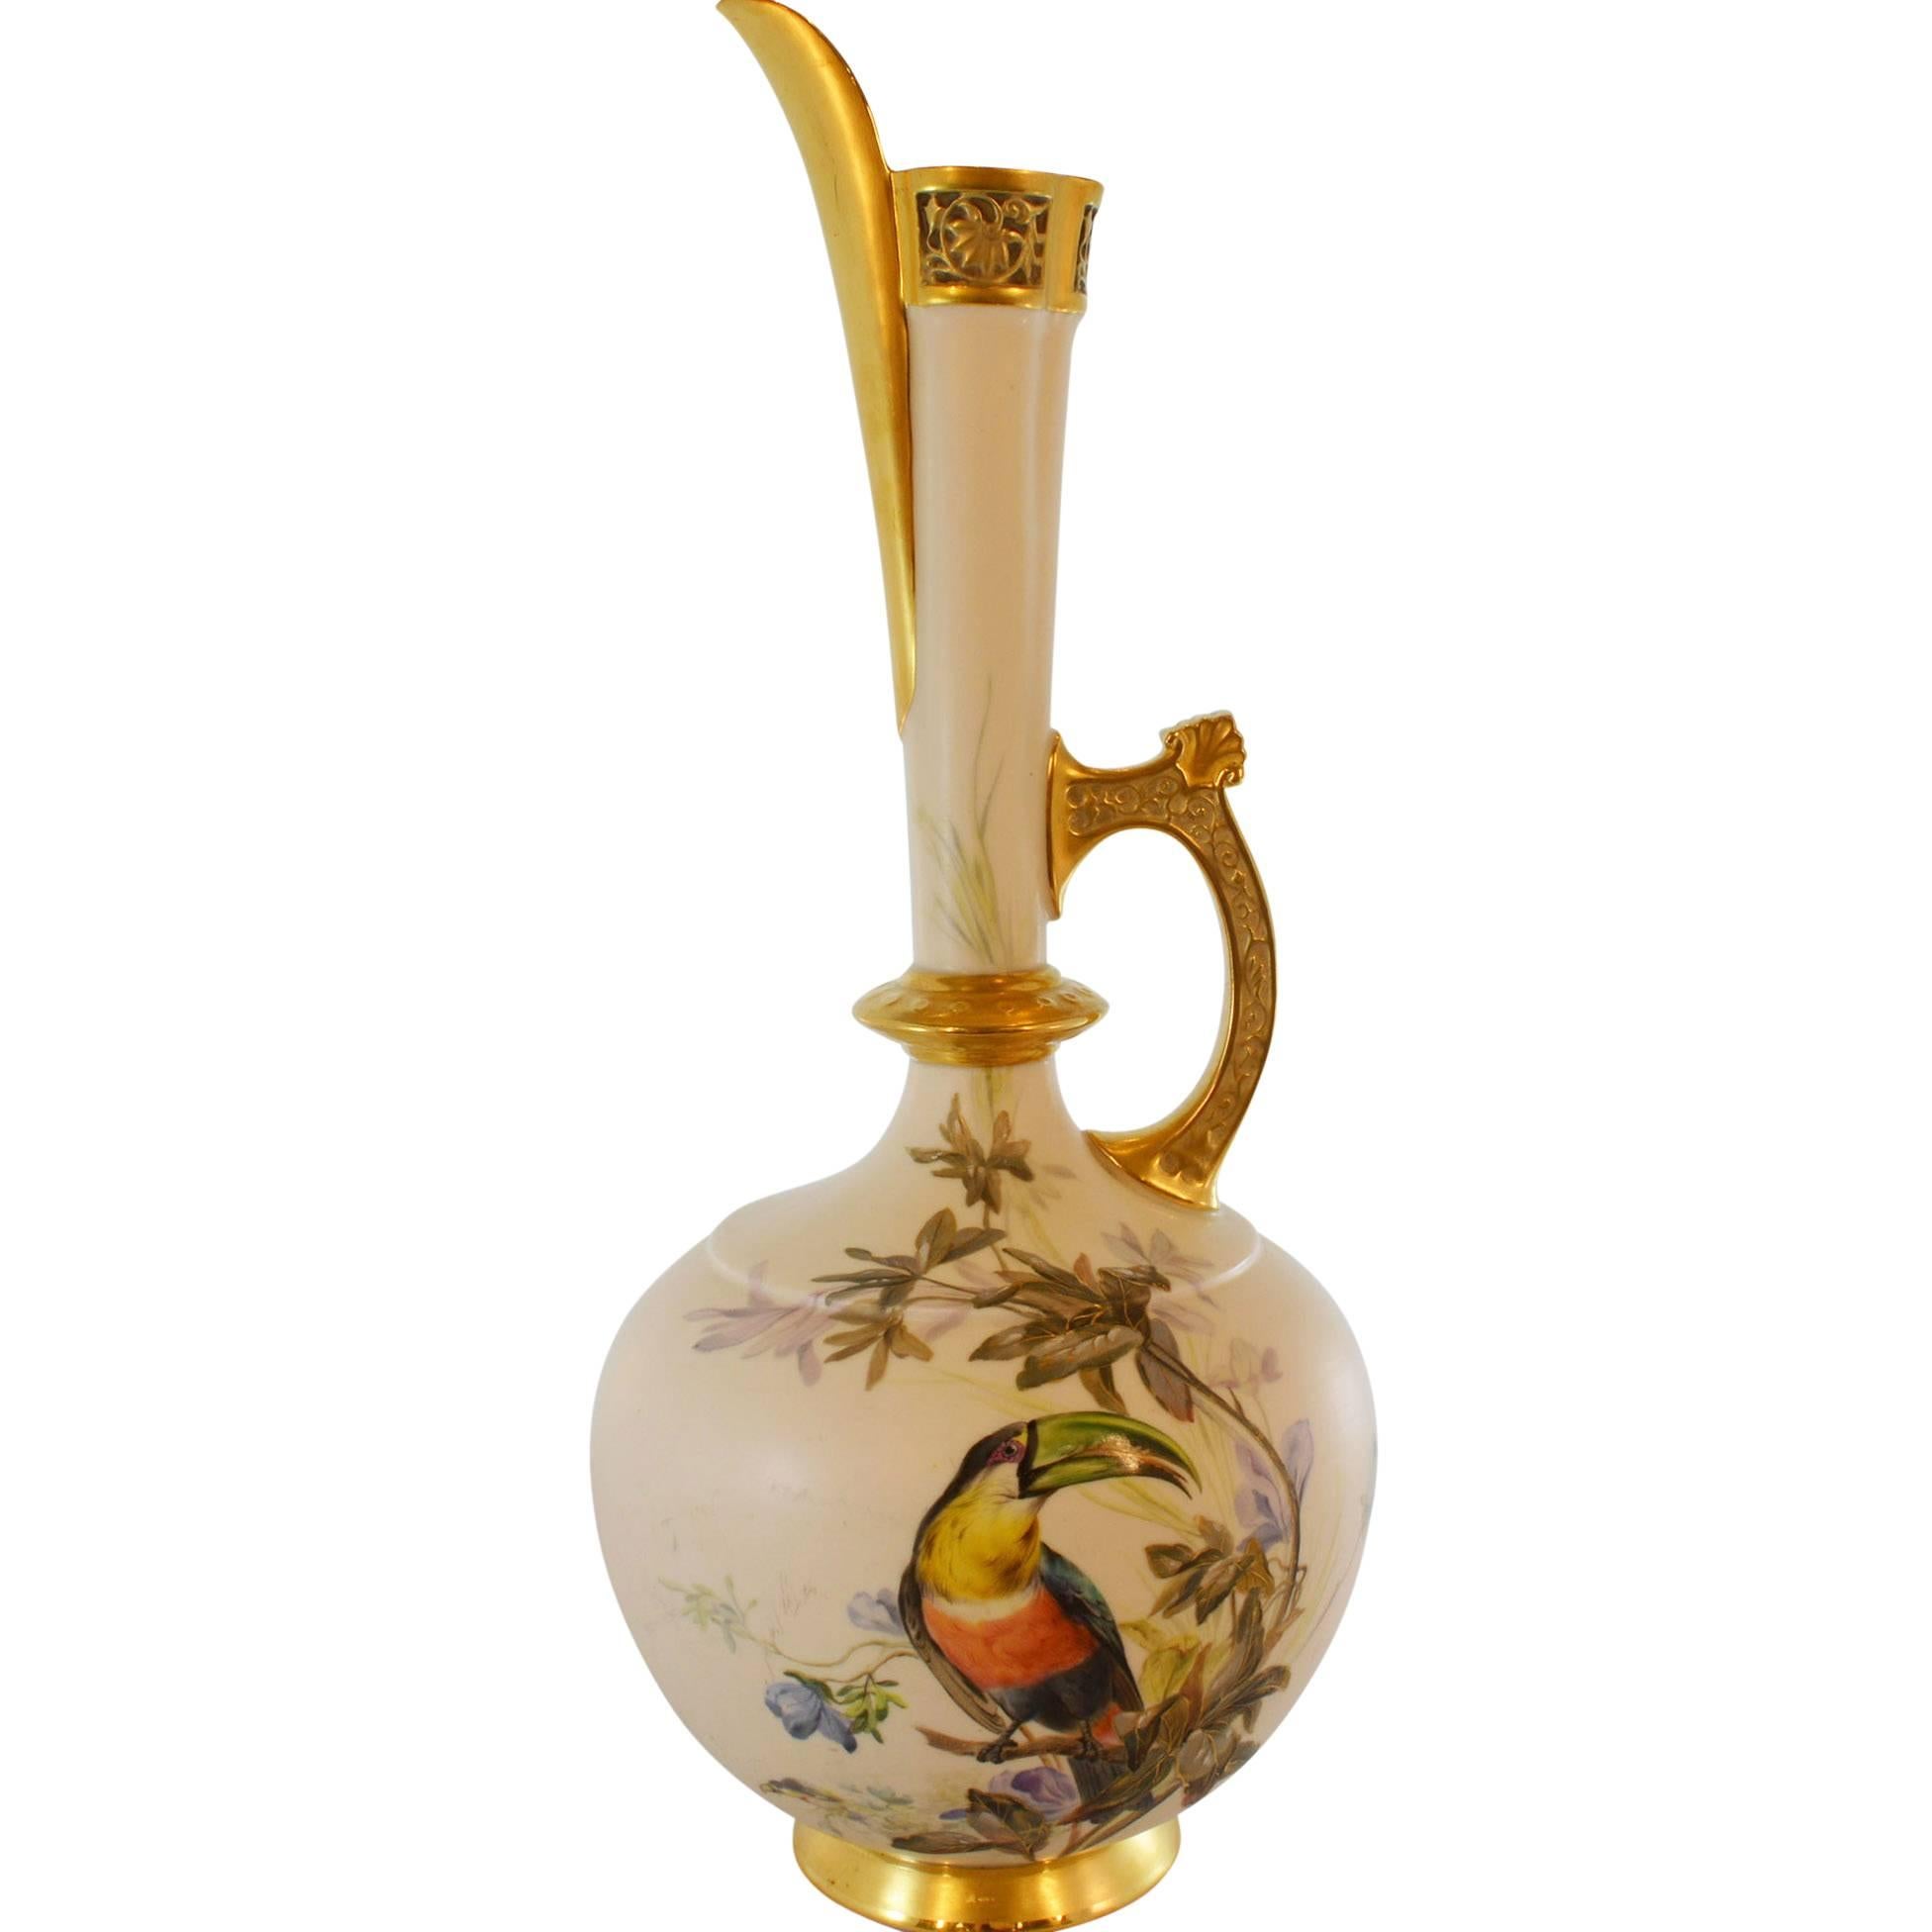 Tall Hand-Painted Toucan Pitcher with Gold Spout